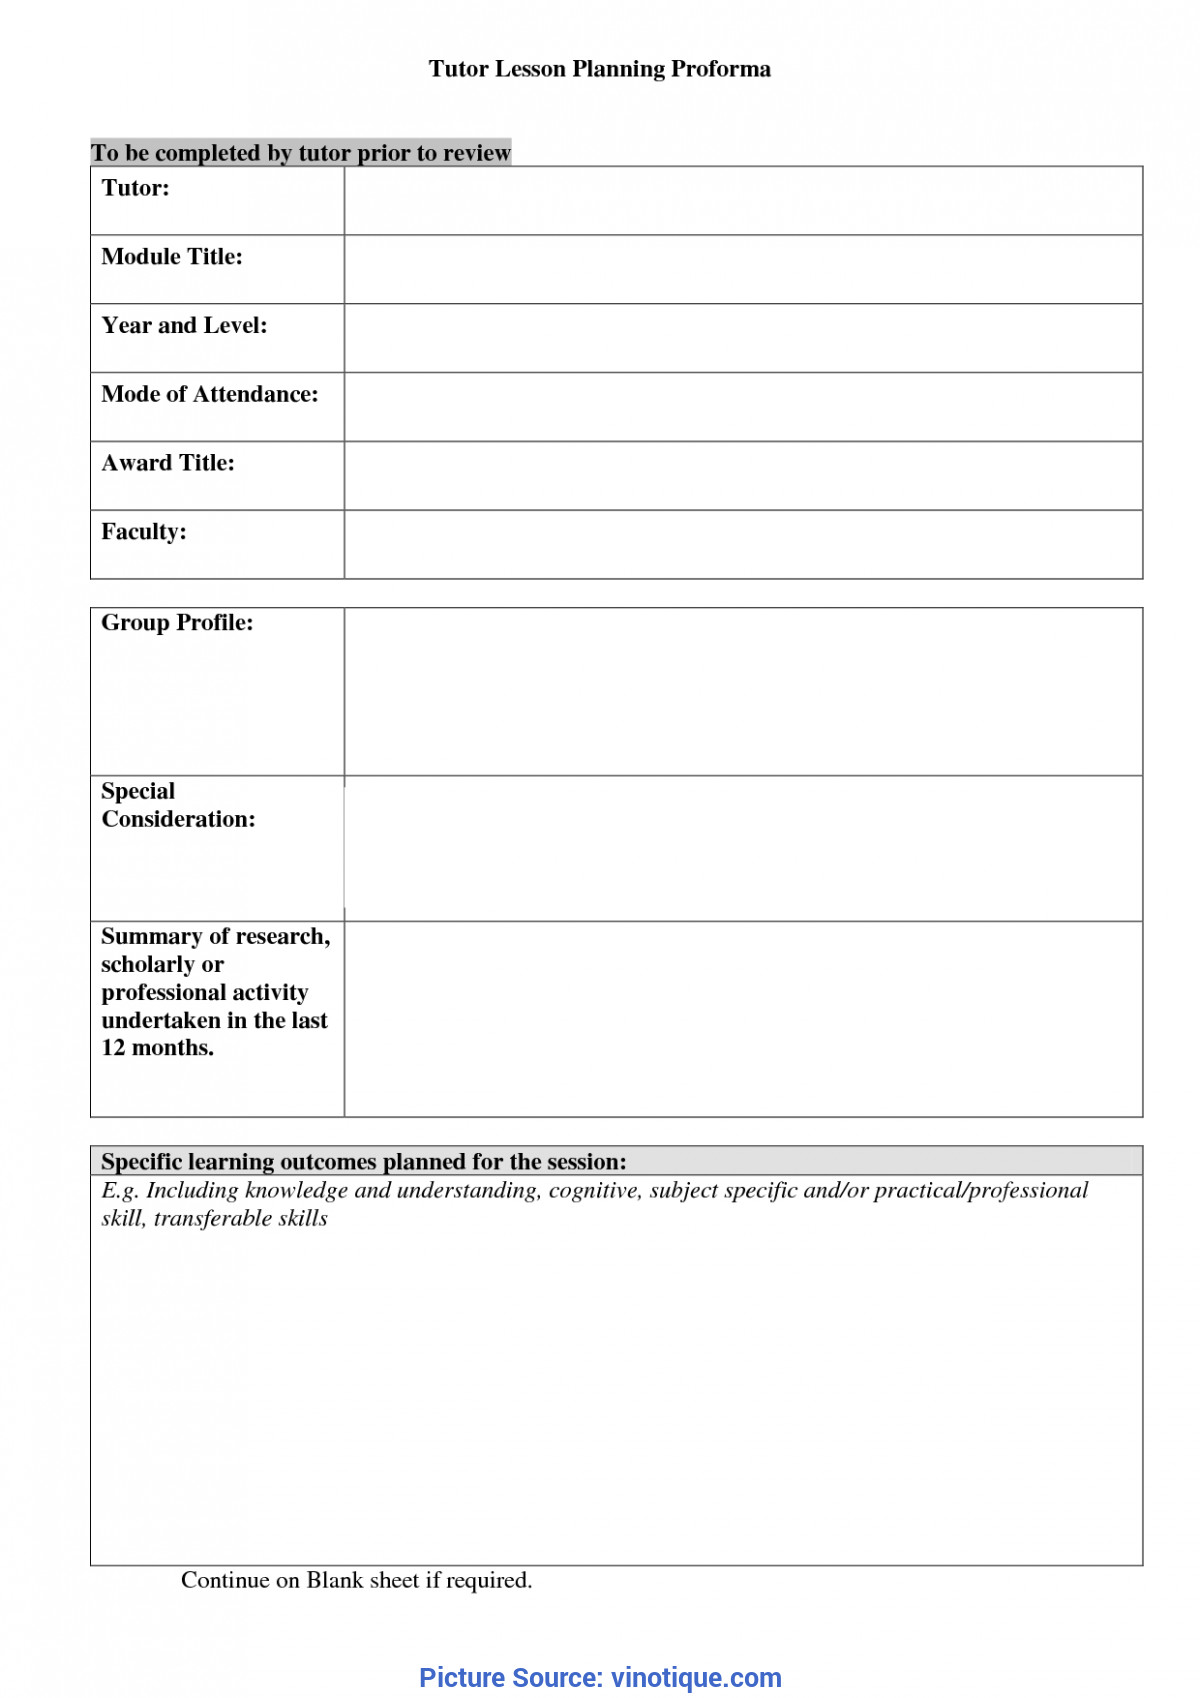 Lesson Plans that Work Useful Siop Lesson Plan Template Printable 20 Siop